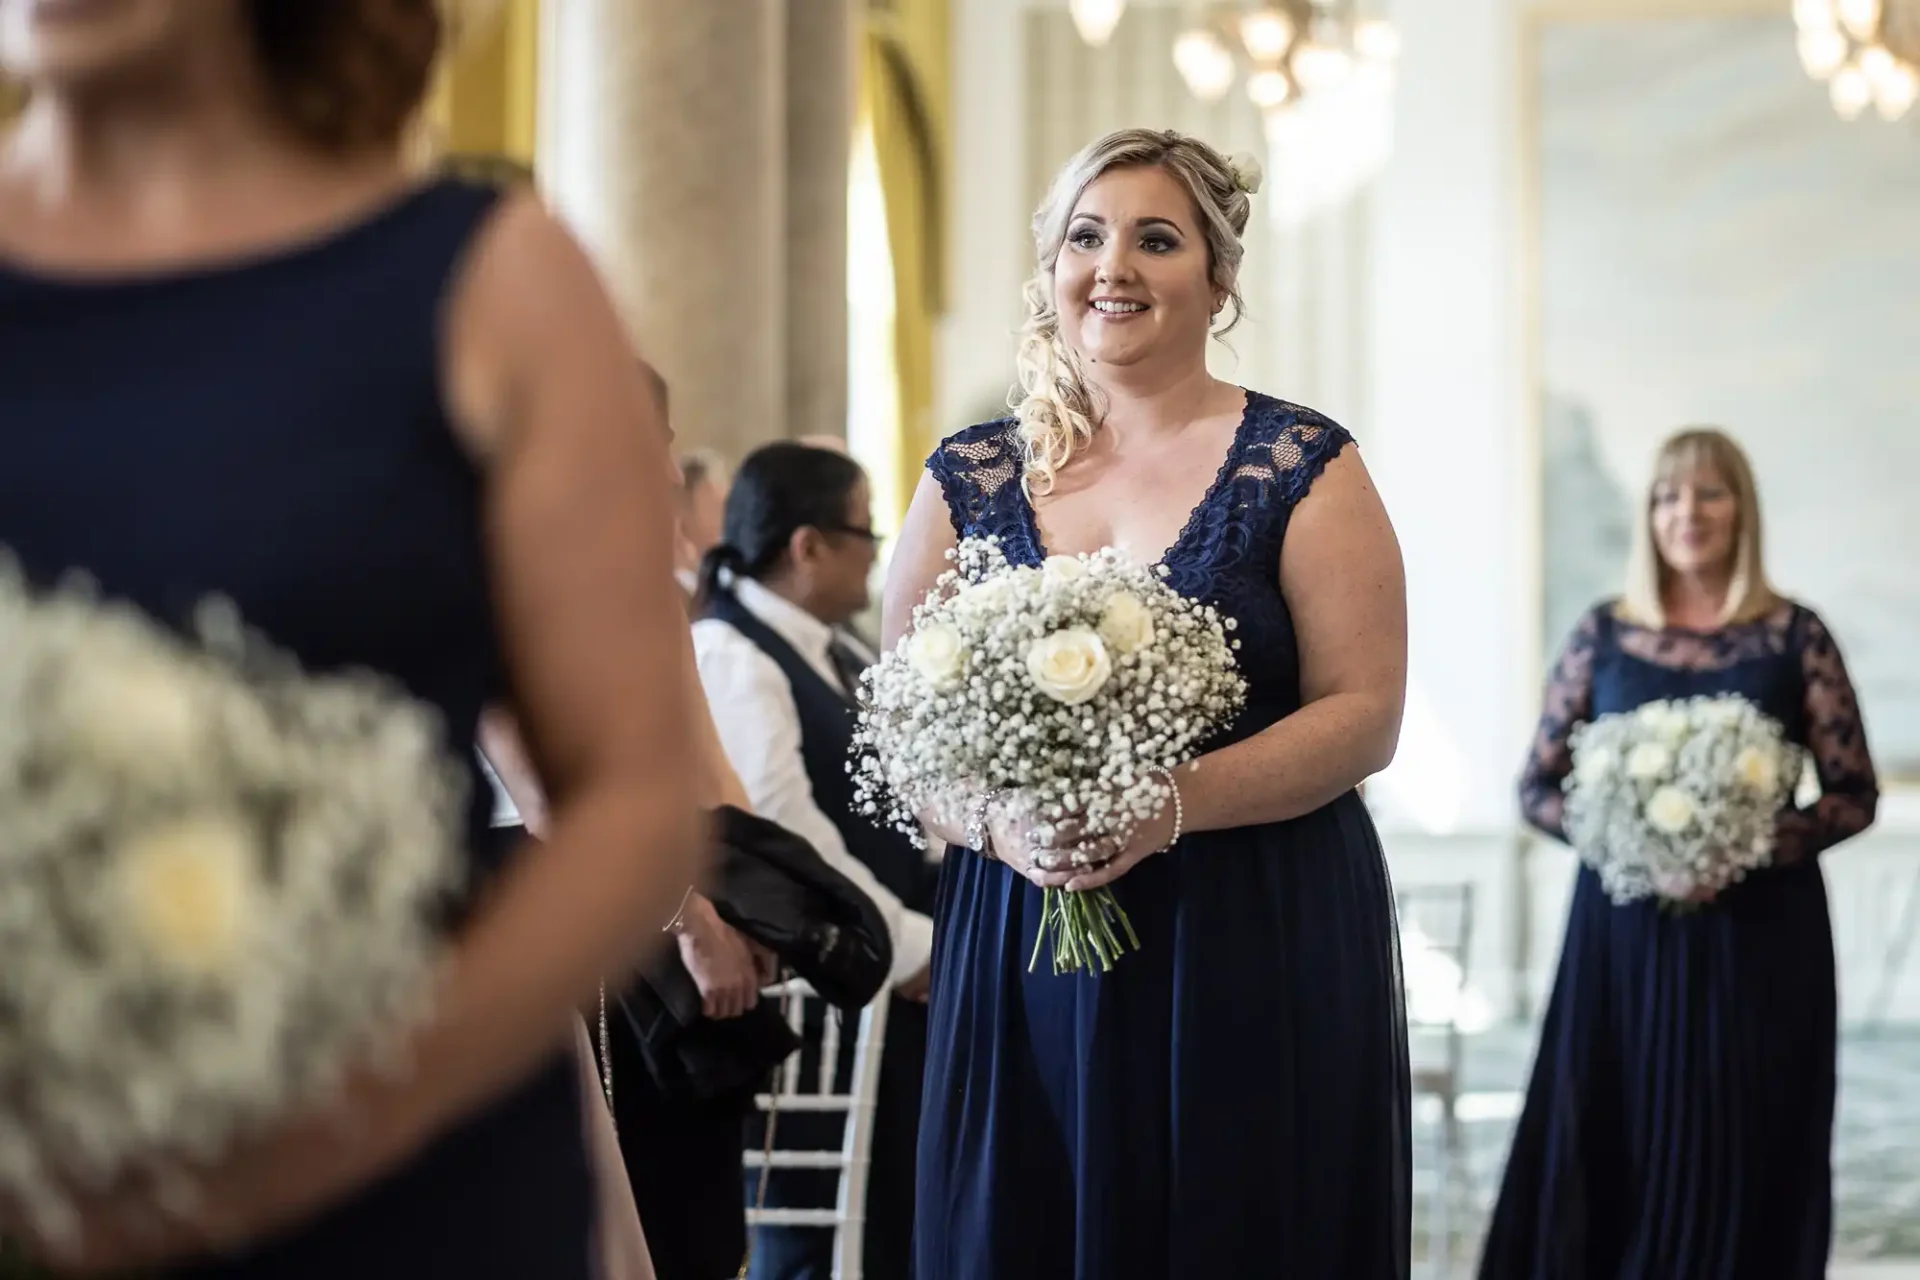 A woman in a navy blue dress smiles, holding a bouquet, at a wedding ceremony with other guests around.